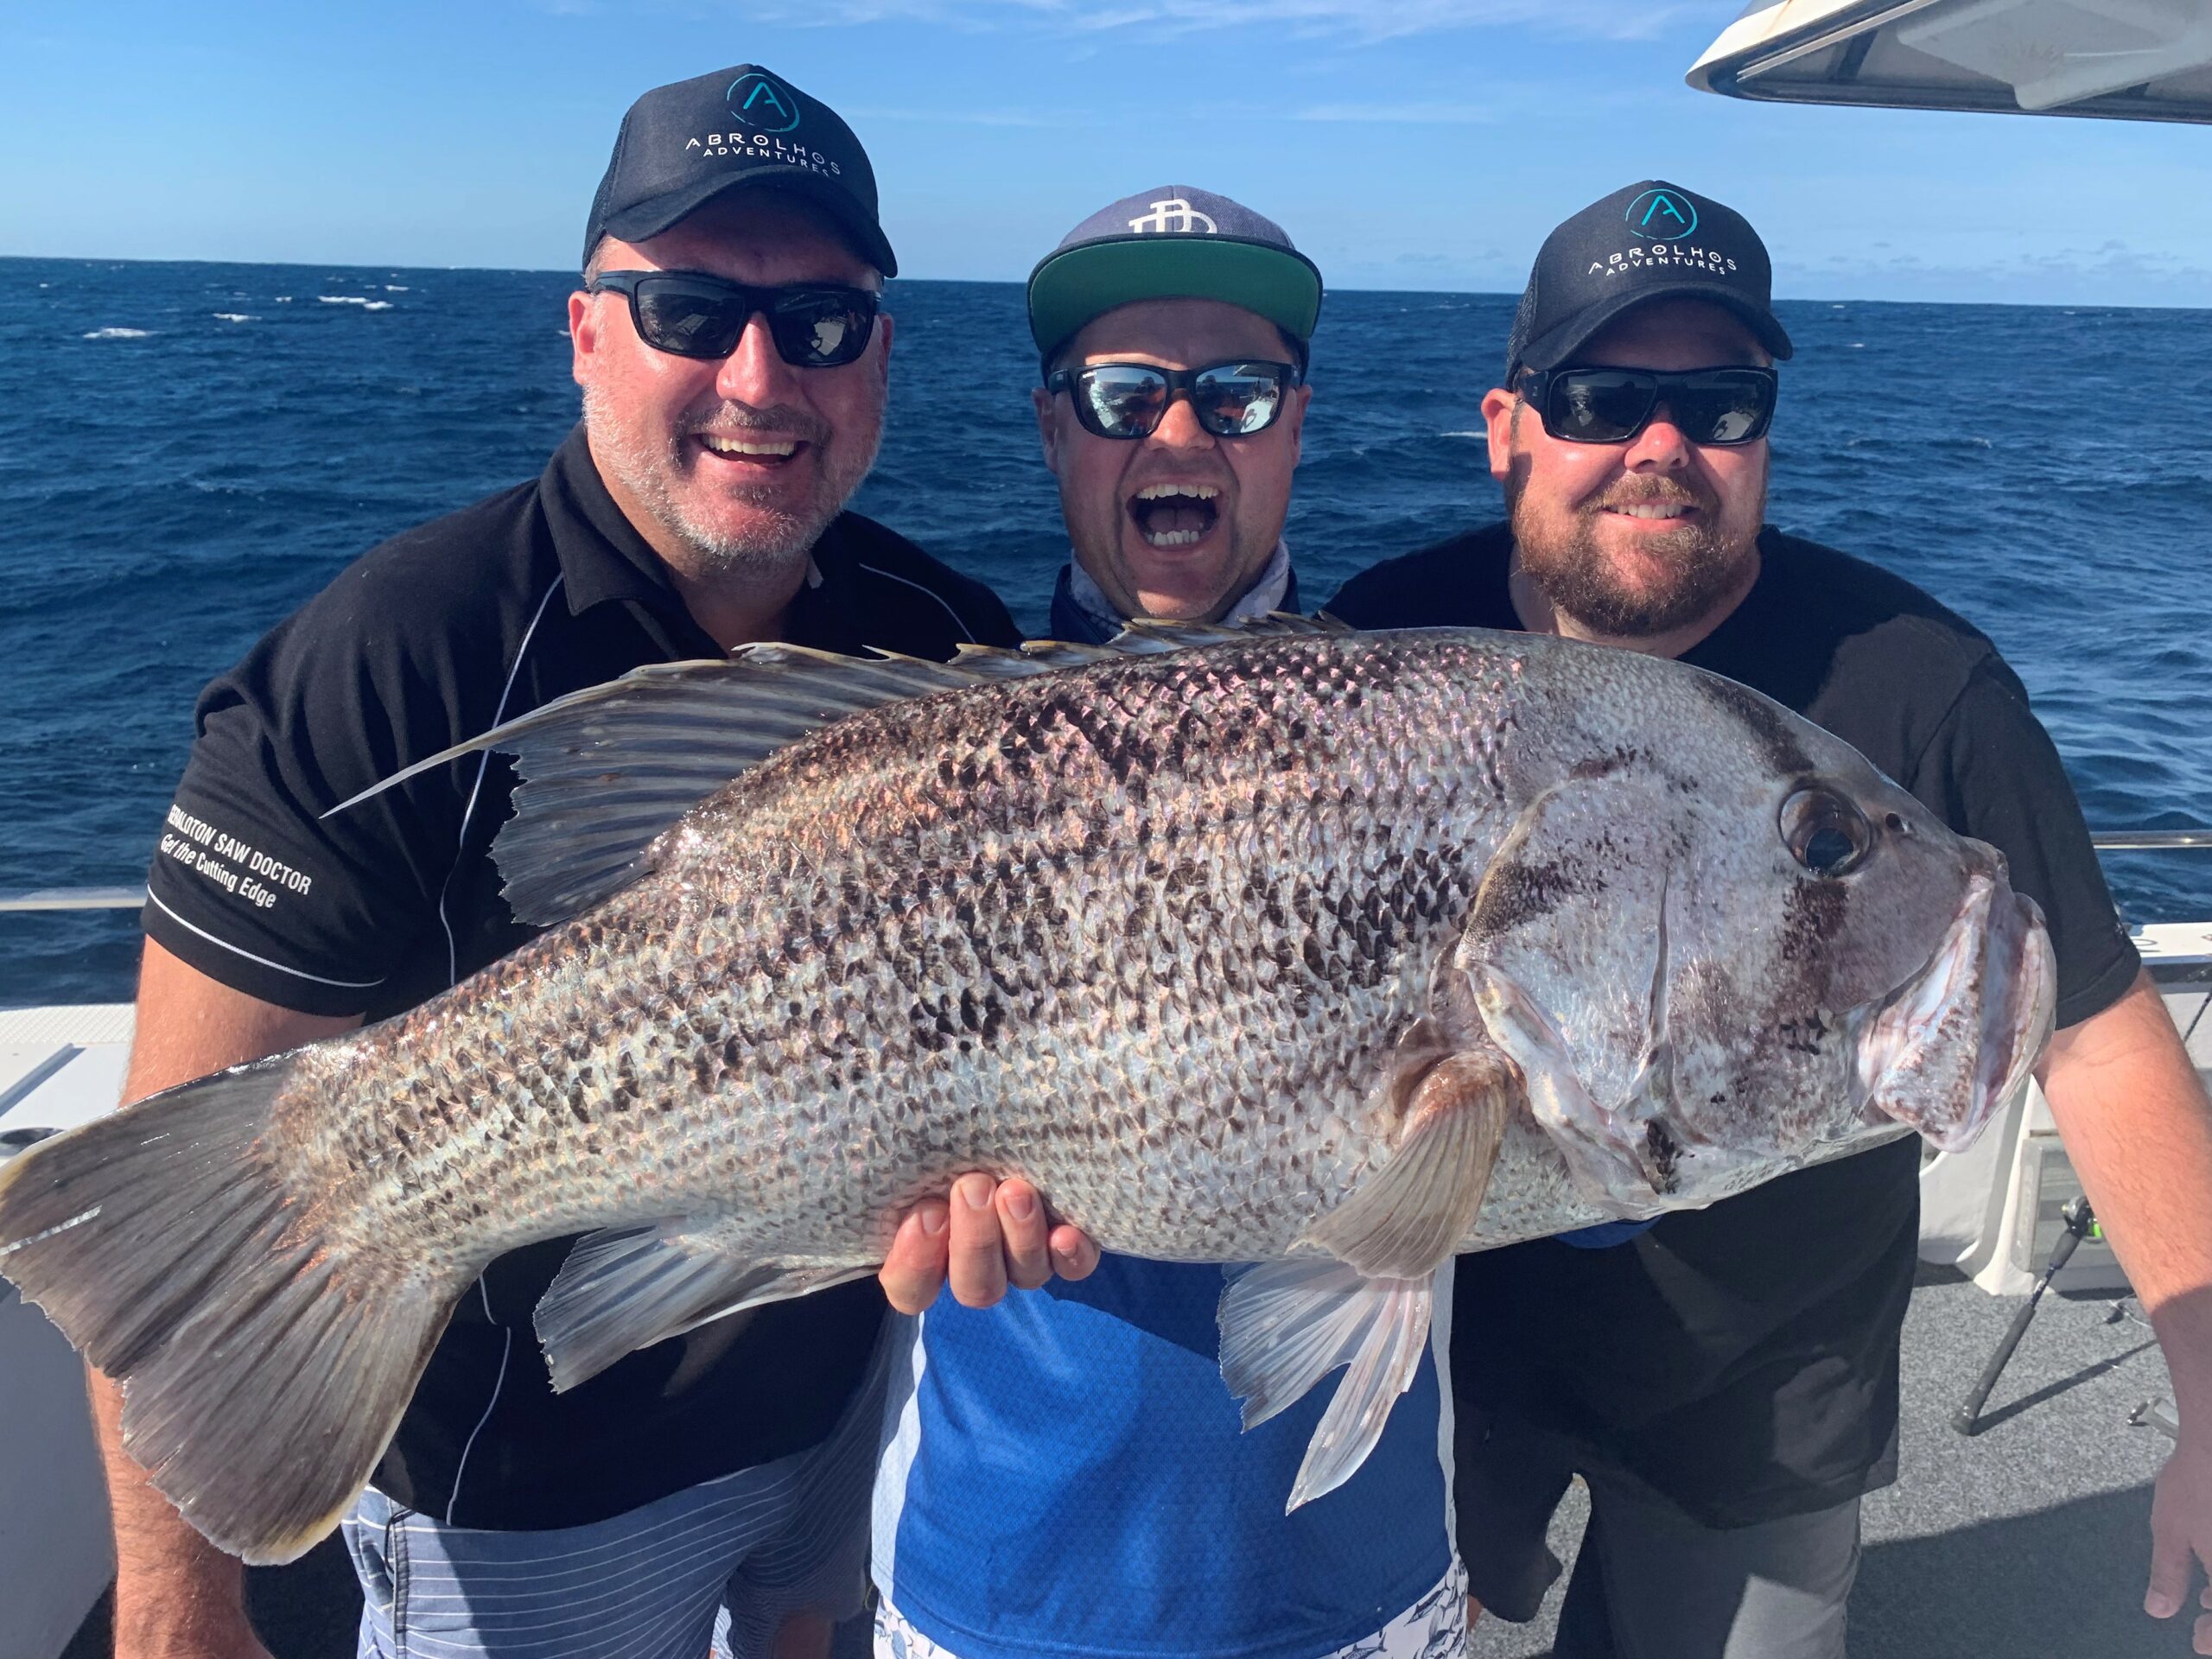 Full Day Fishing Charter Onboard Fortitude - Abrolhos Islands